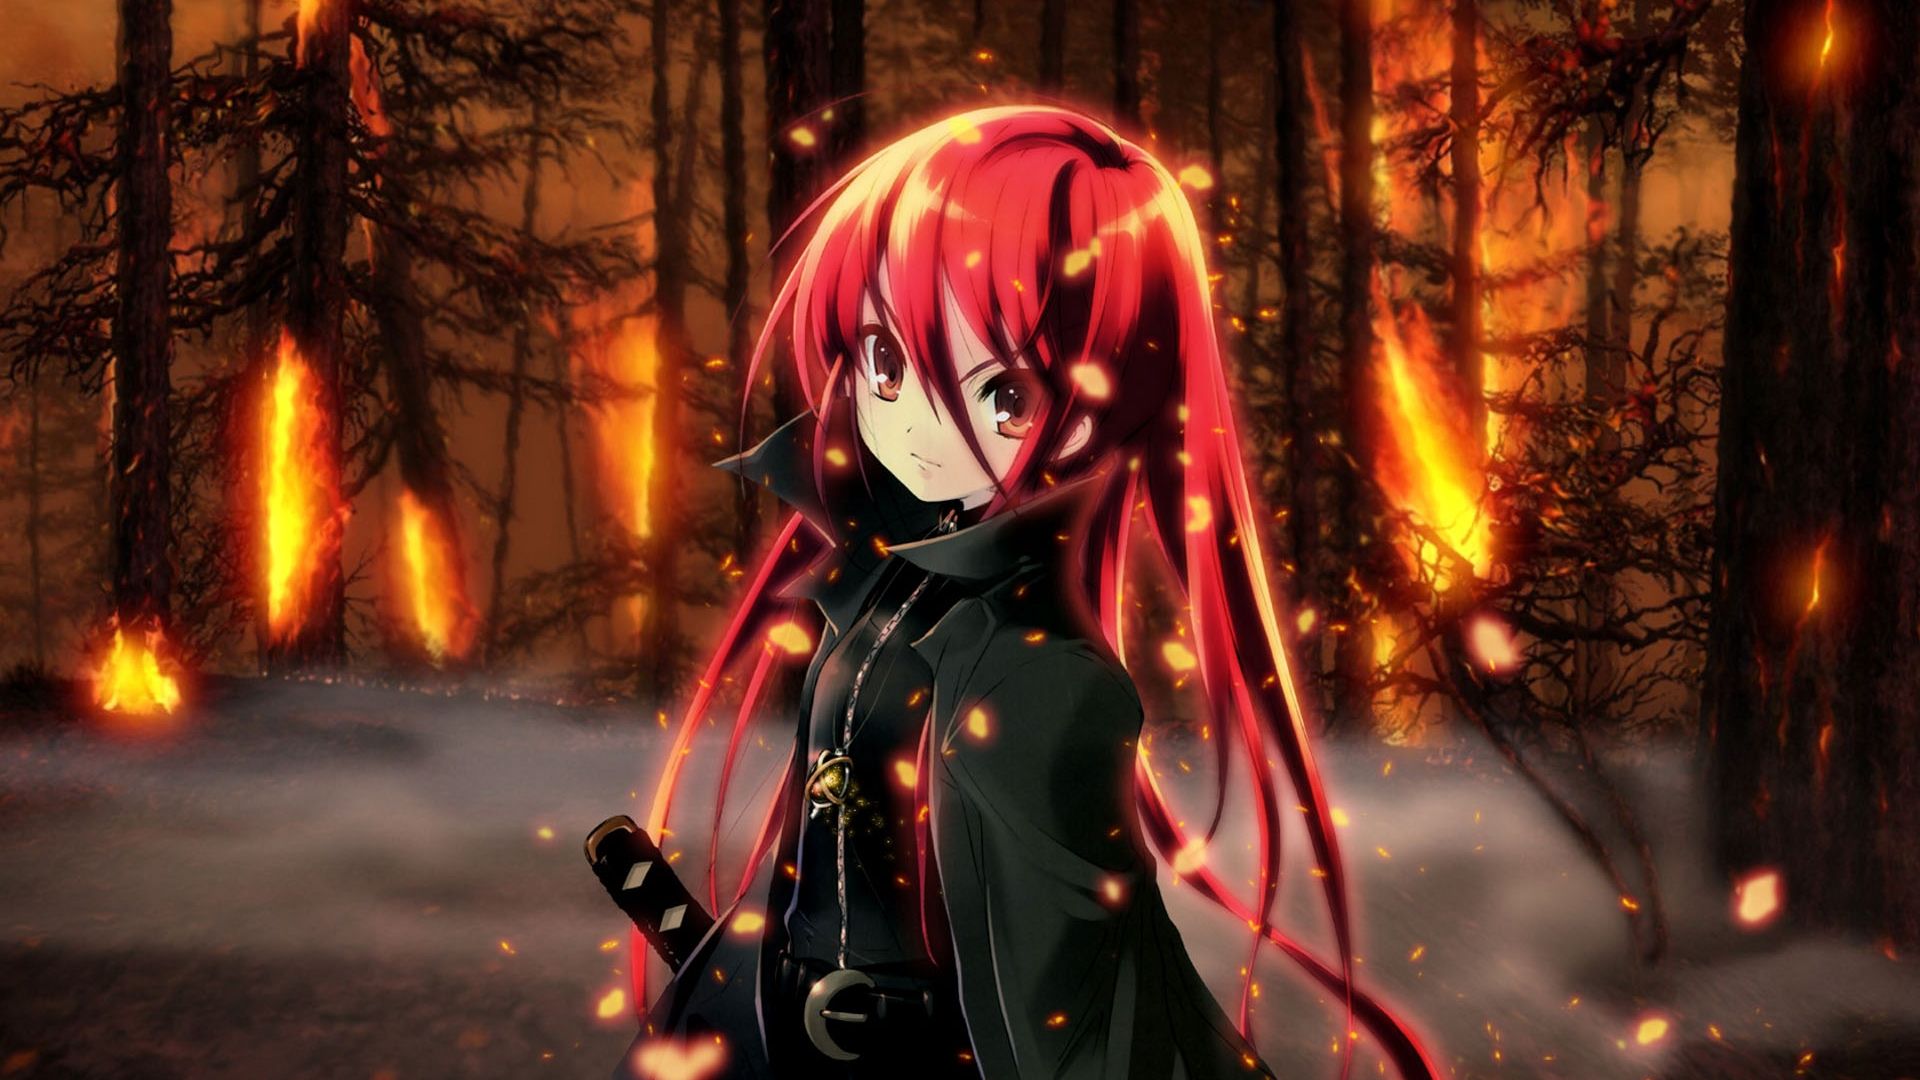 Free download Image Anime girl with red hair and a sword wallpapers